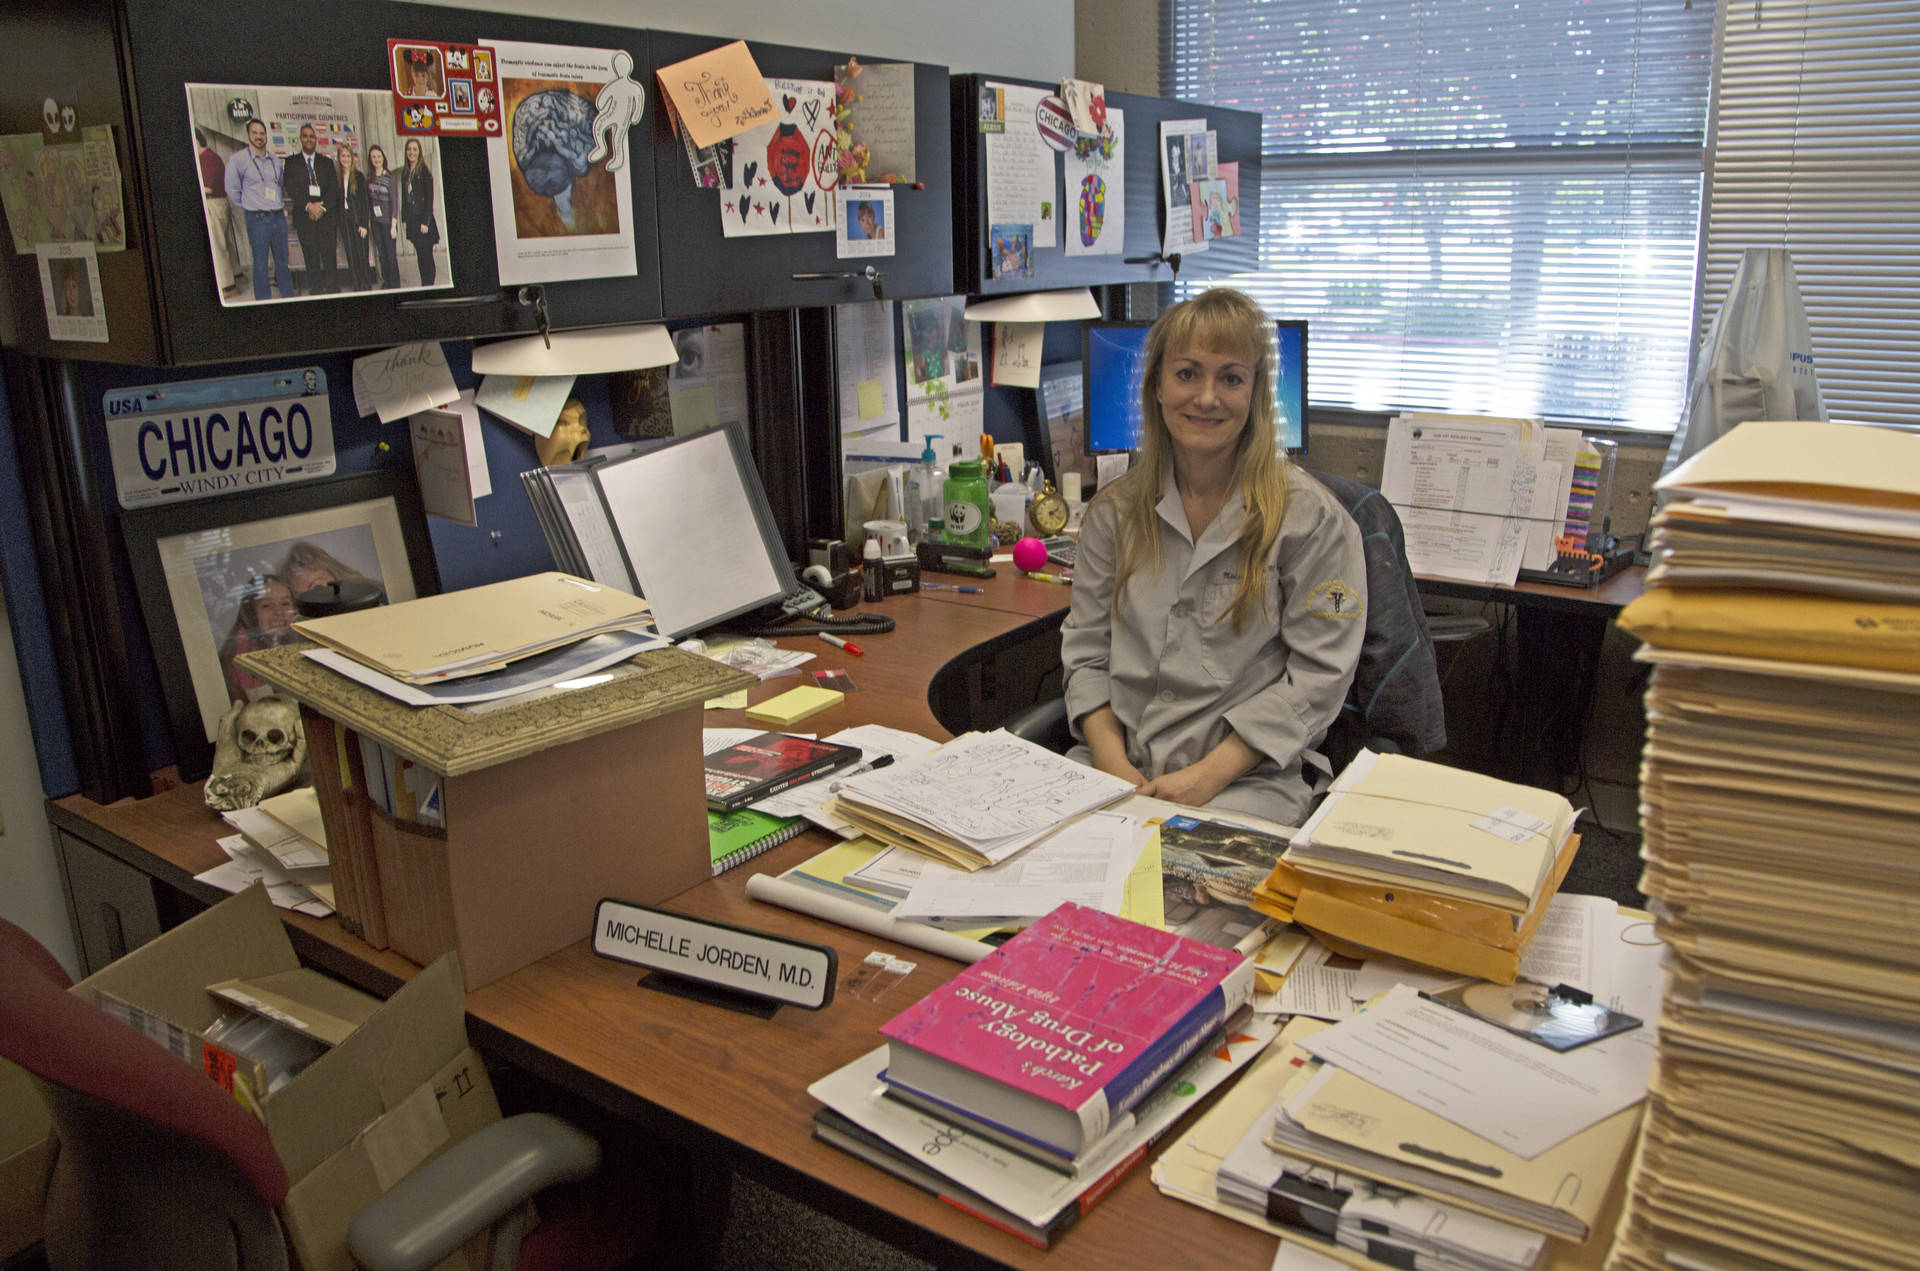 Reports are stacked high on the desk of Assistant Medical Examiner
Michelle Jorden. The medical examiner¹s office in Santa Clara County handles more than 4,000
cases a year. Lisa Pickoff-White/KQED